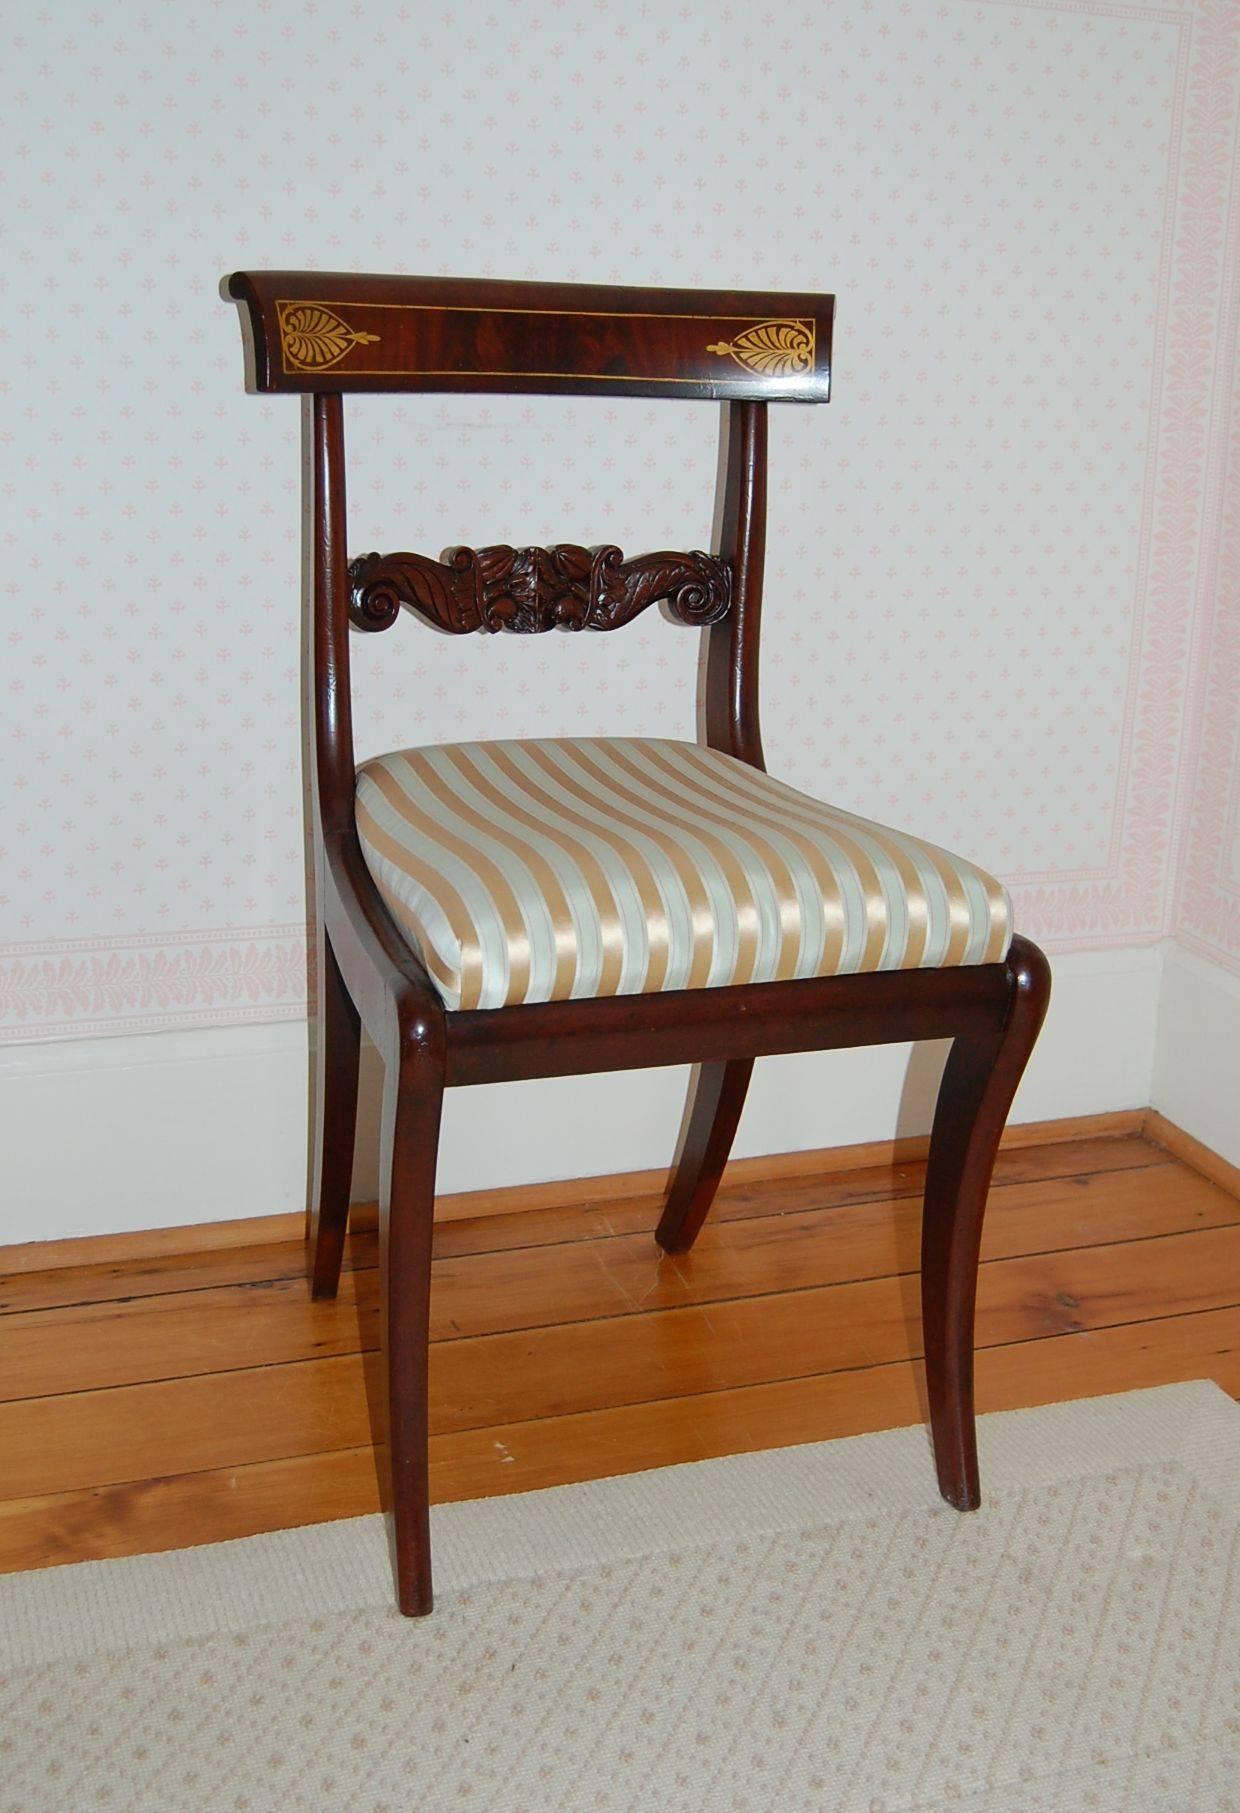 Pair of mahogany side chairs, circa 1820-1830, in the style of Anthony G. Quervelle, recently recovered in a striped silk fabric by Scalamandre #154-001, Provence Satin Tafetta. Very good condition with some old restoration/ repairs. These chairs